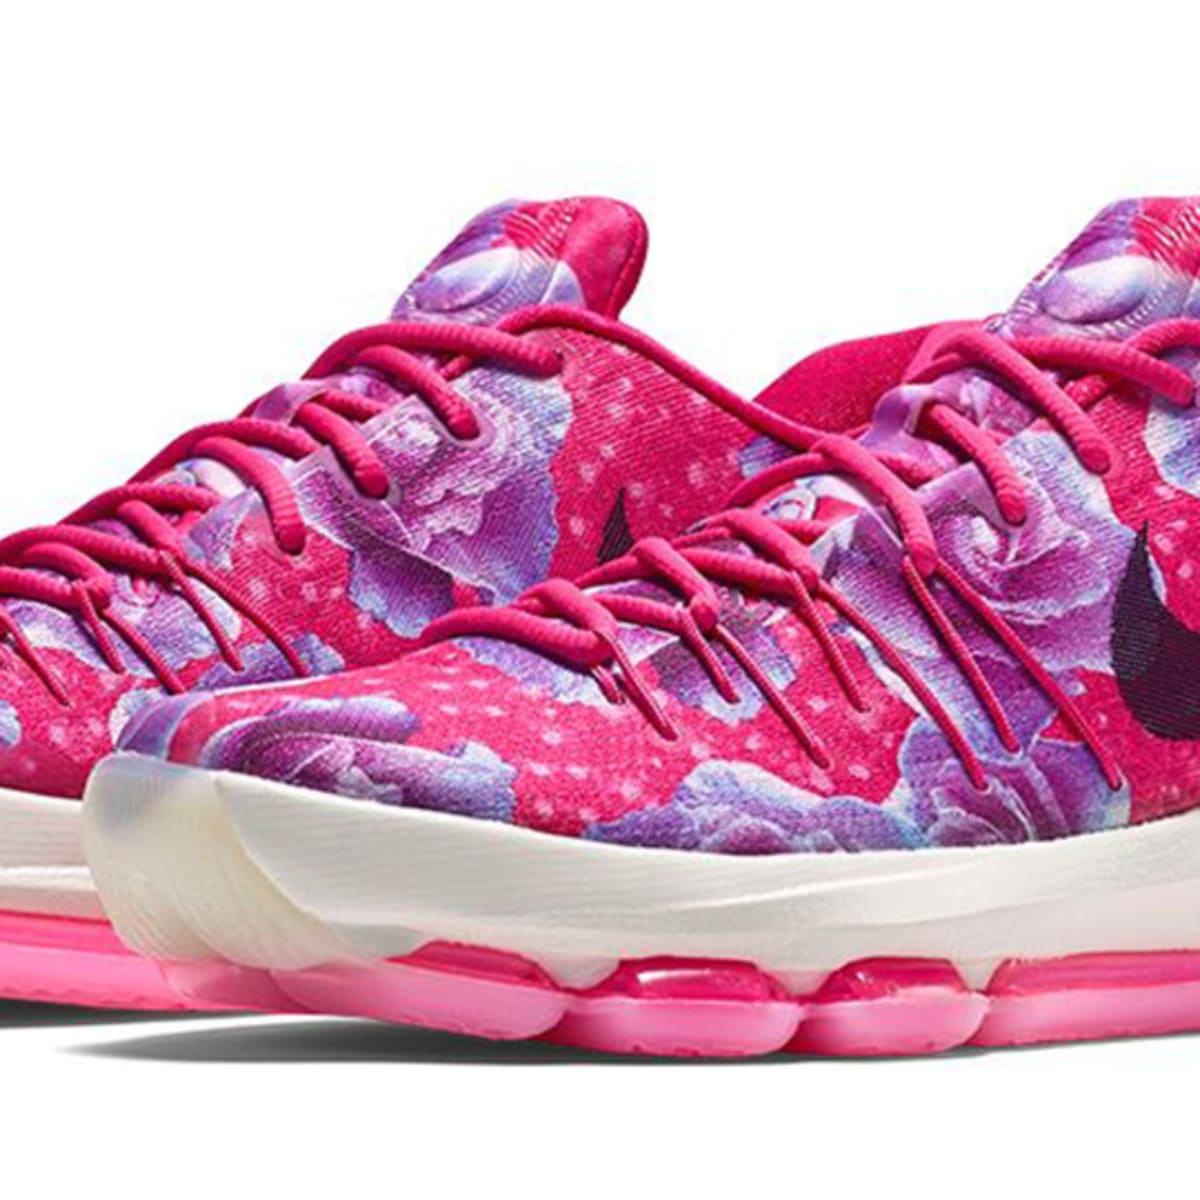 kevin durant pink